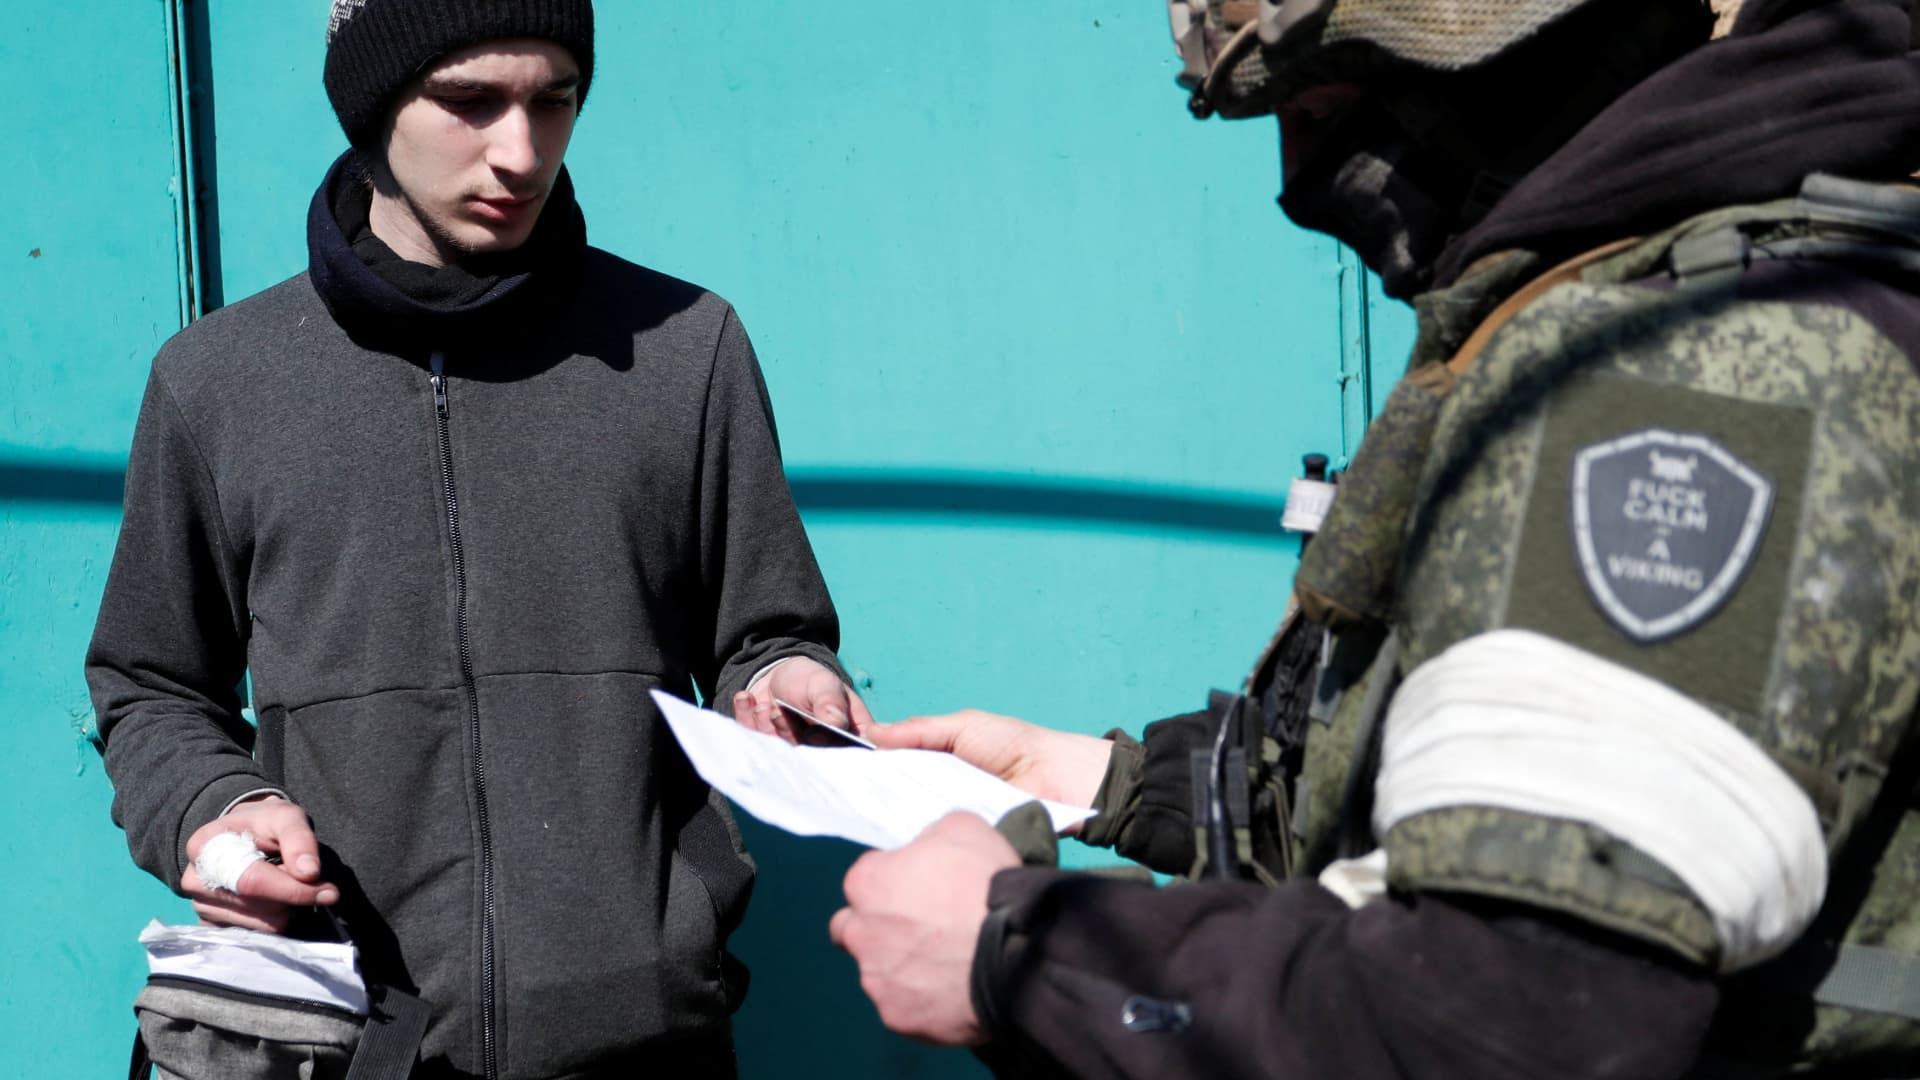 A service member of pro-Russian troops checks the documents of a local resident during Ukraine-Russia conflict in the southern port city of Mariupol, Ukraine April 7, 2022.